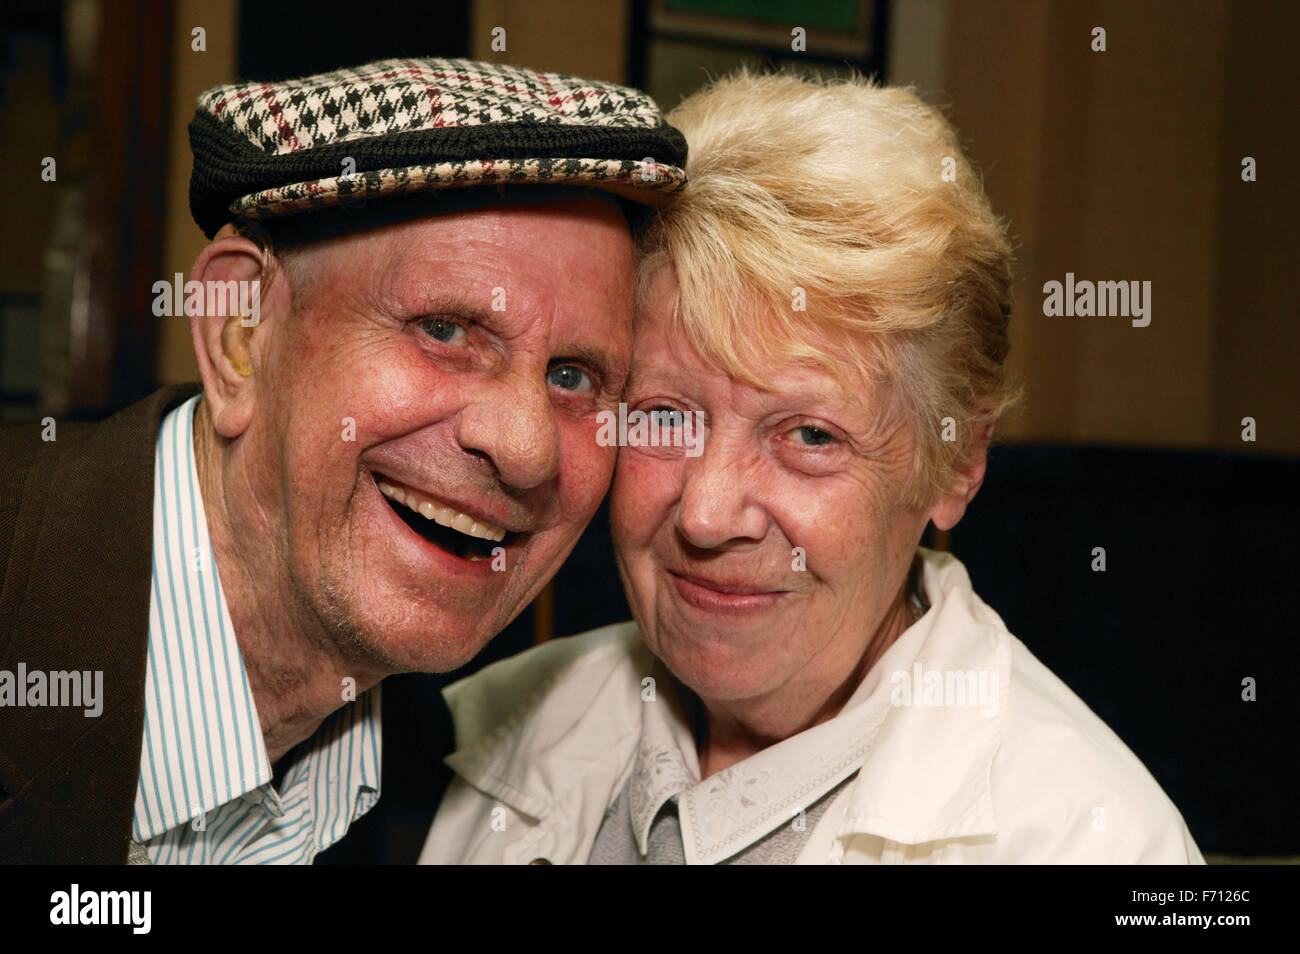 Man and woman in a pub, Stock Photo